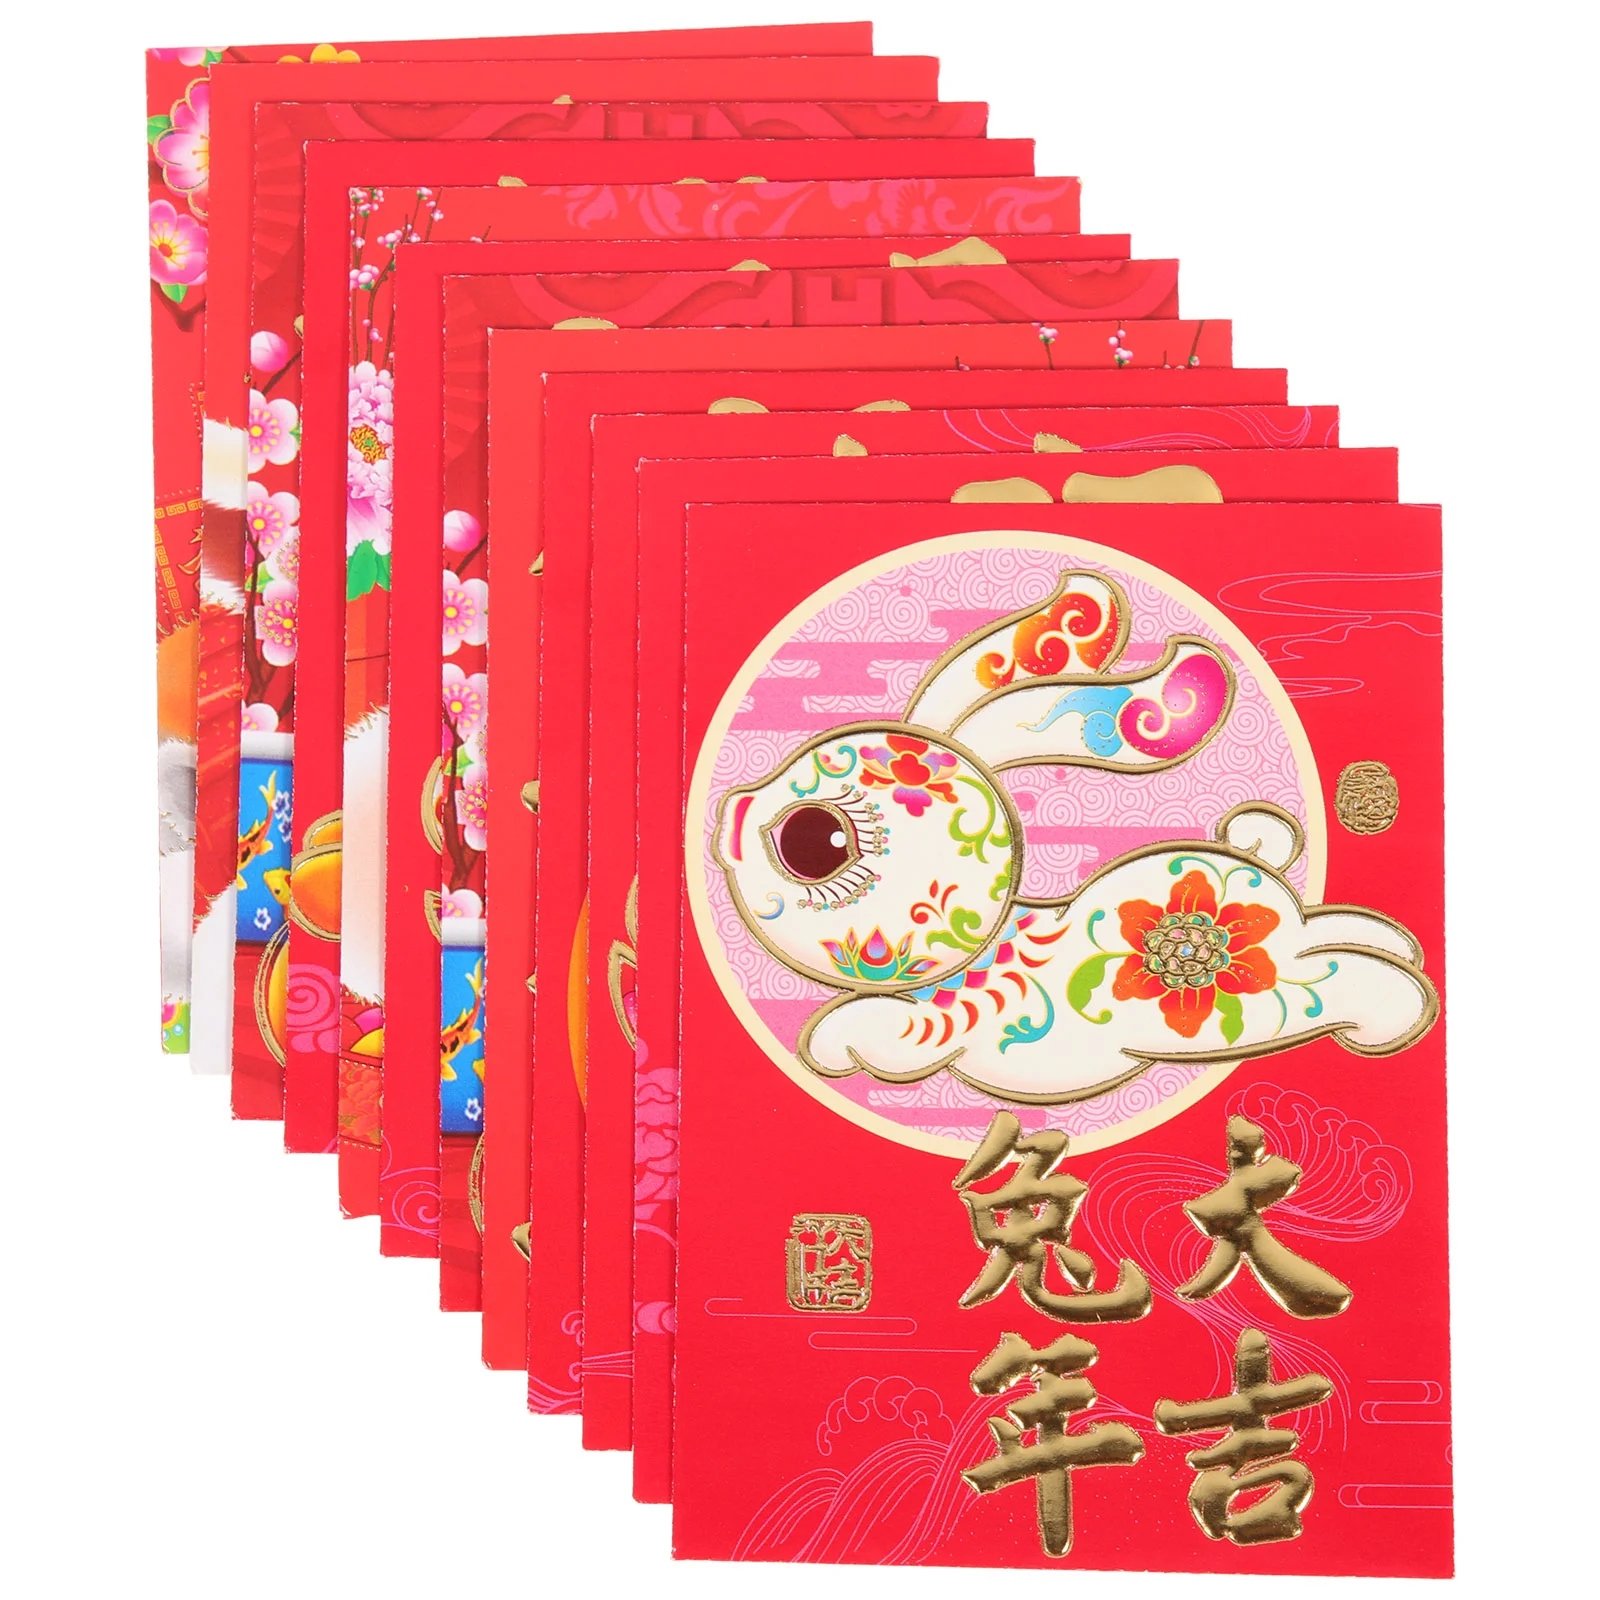 

Red Year Envelopes Rabbit Chinese Money Packet New Envelope Festival Spring Packets Zodiac Gift The Hong Bao Cash Wedding Lucky